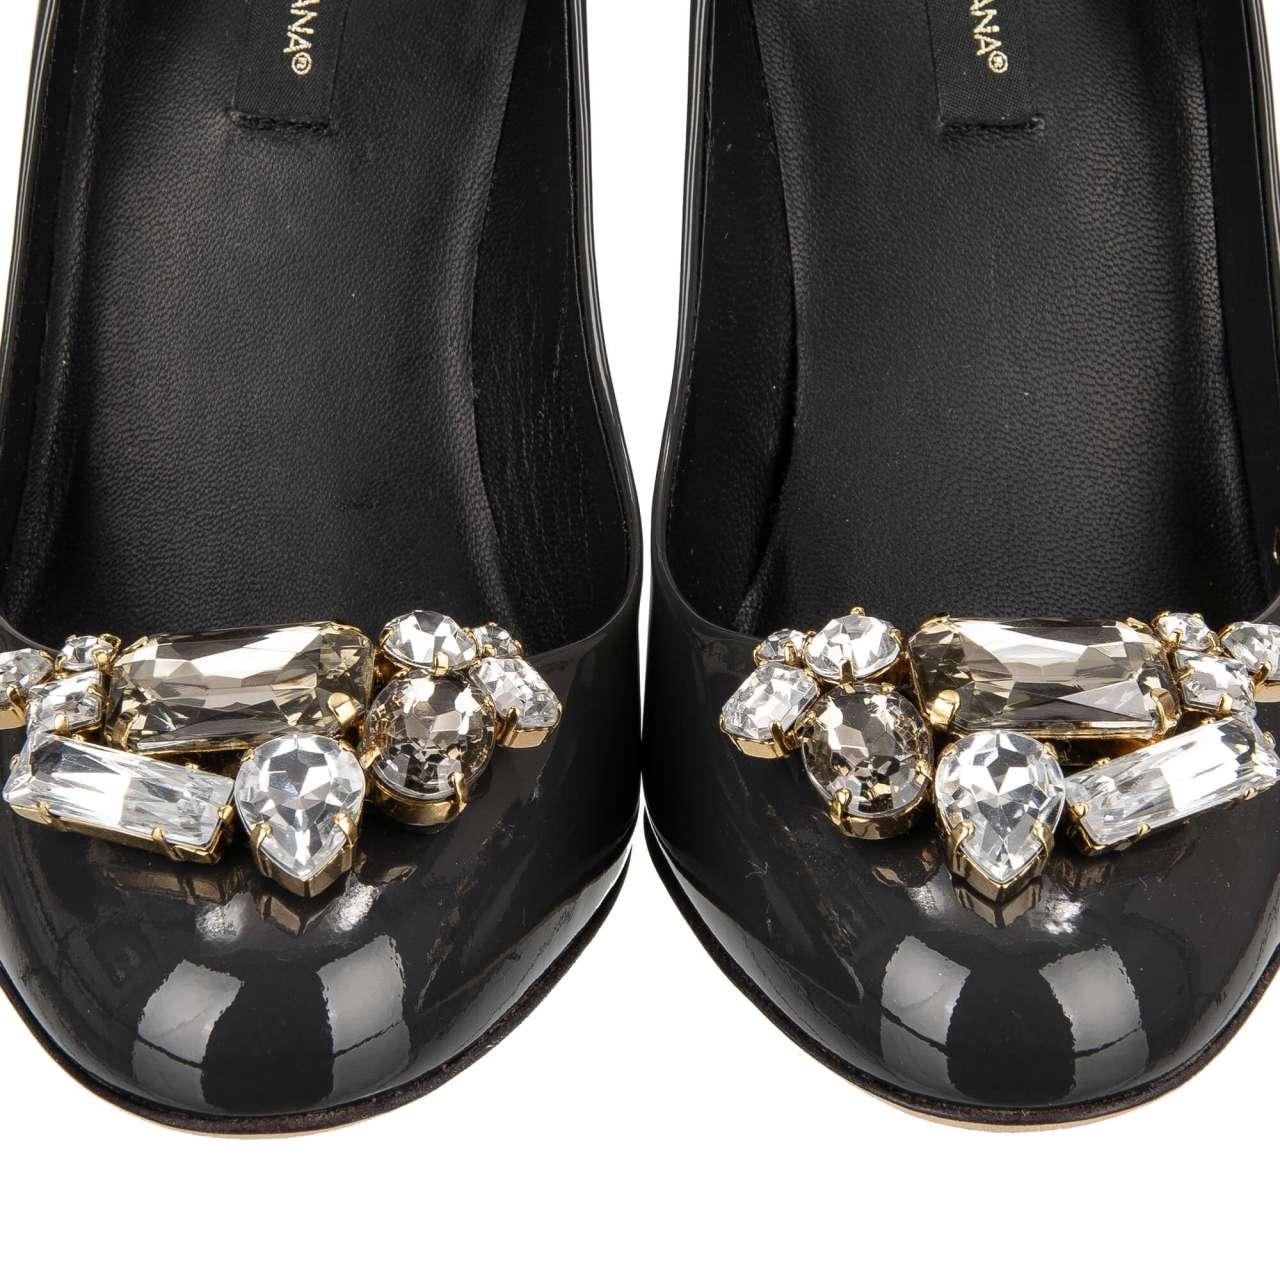 Women's Dolce & Gabbana - Patent Leather Heels Pumps VALLY Crystal Brooch Grey 35 5 For Sale